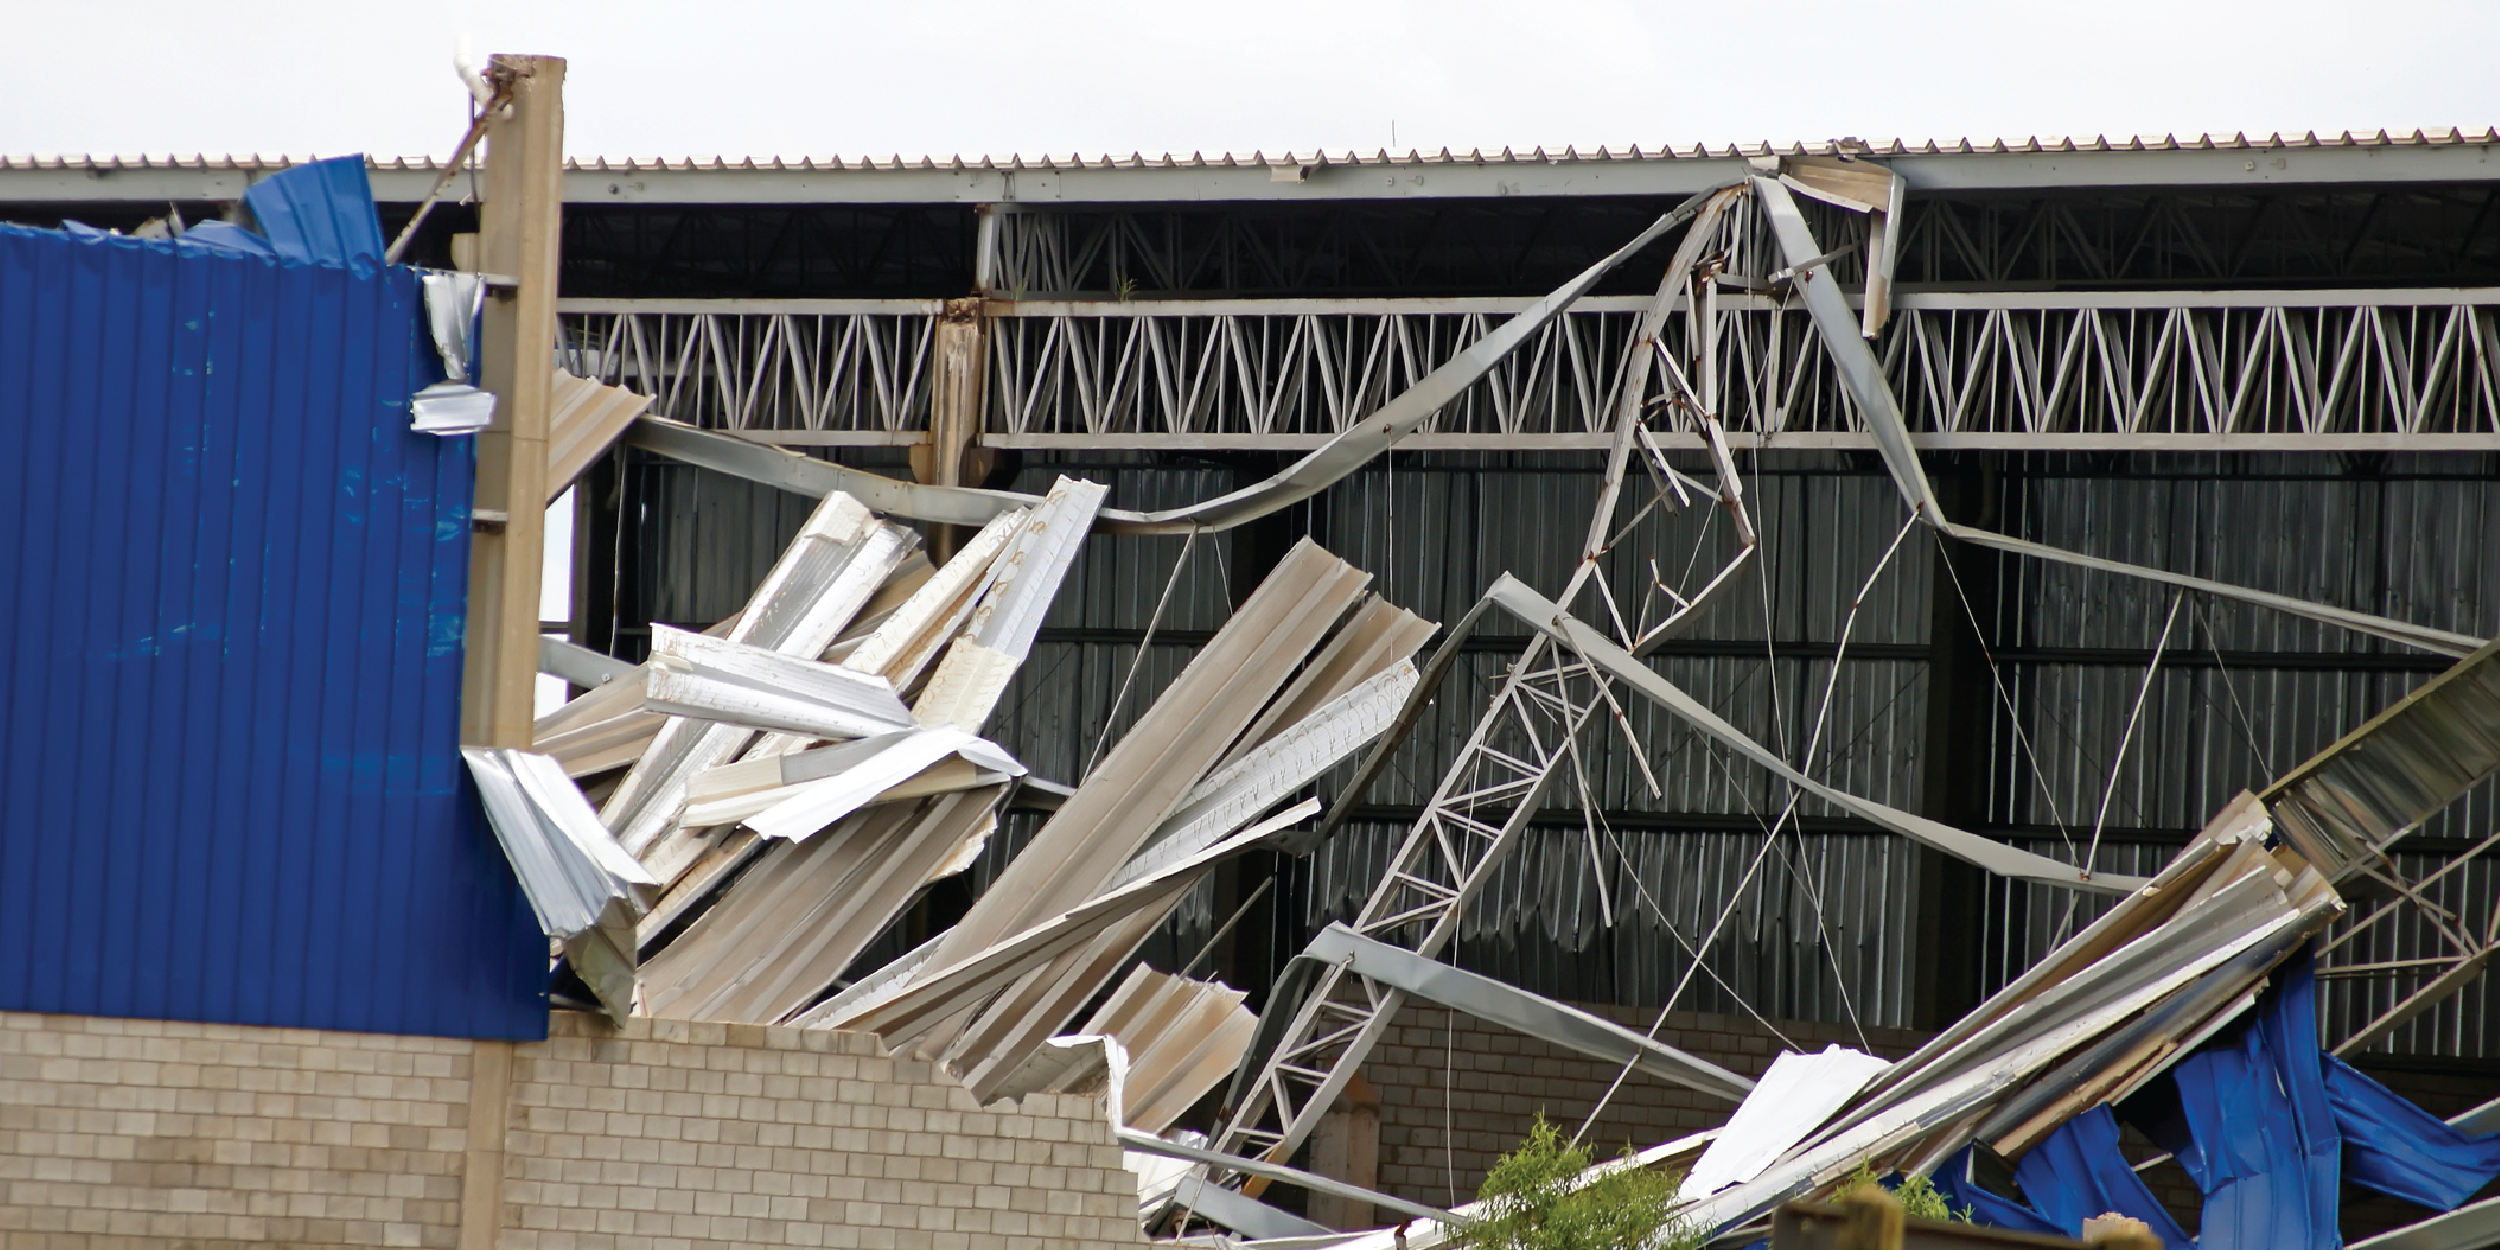 Visible wind damage following a storm - a roof and siding have been ripped from a building.